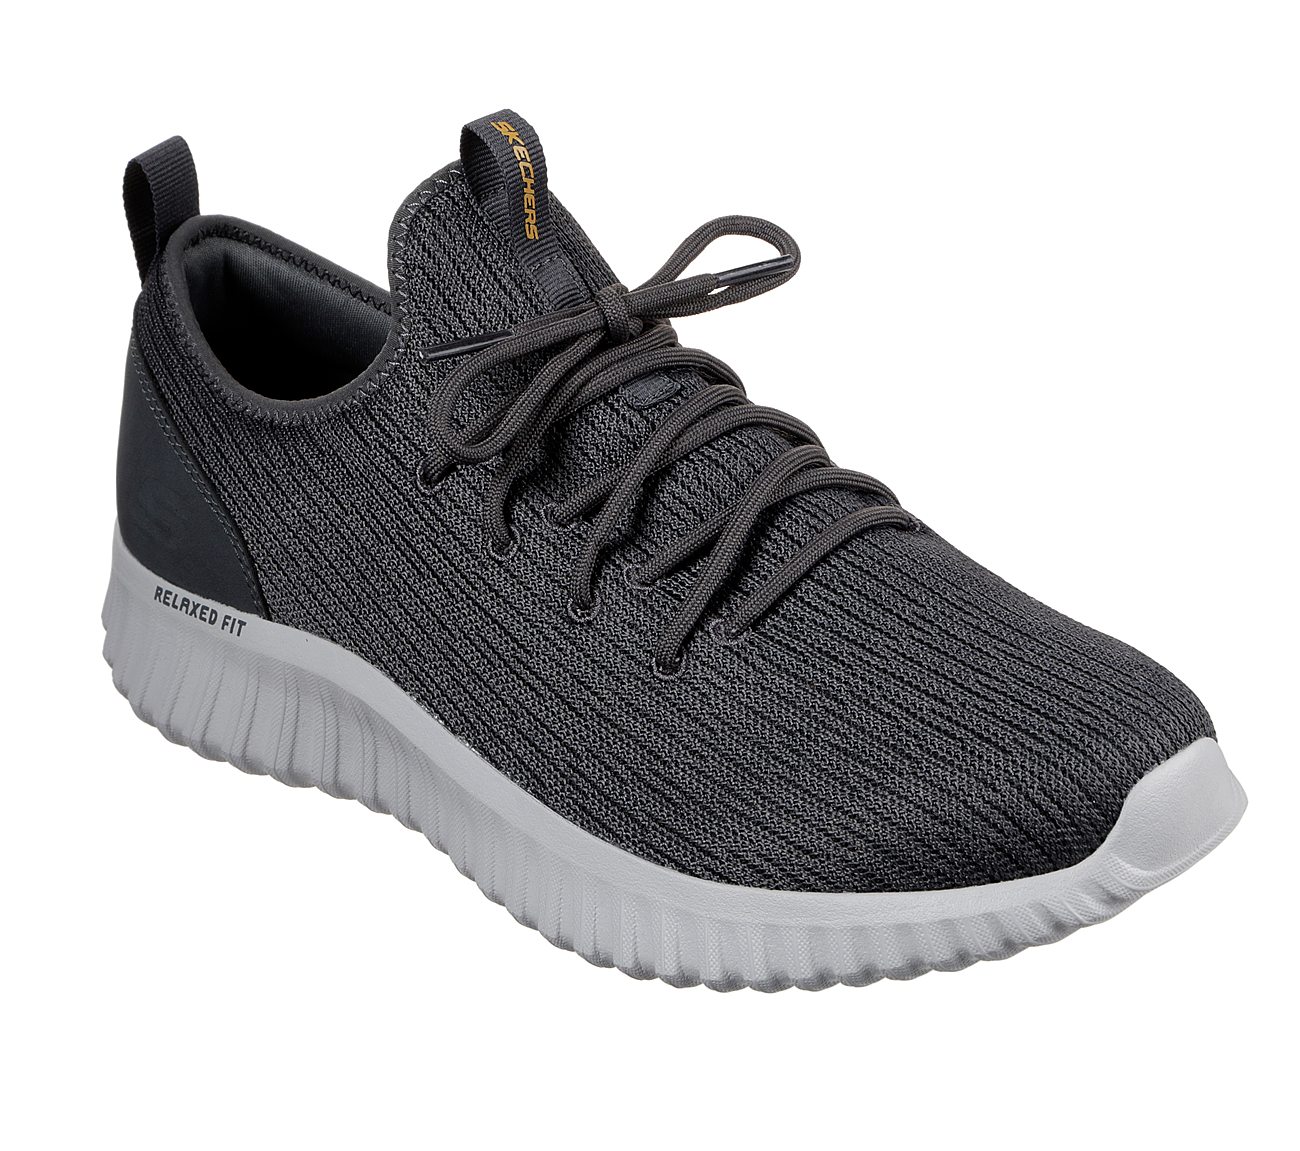 SKECHERS De hombre Relaxed Fit: Depth Charge 2.0 Garnado - COLOMBIA